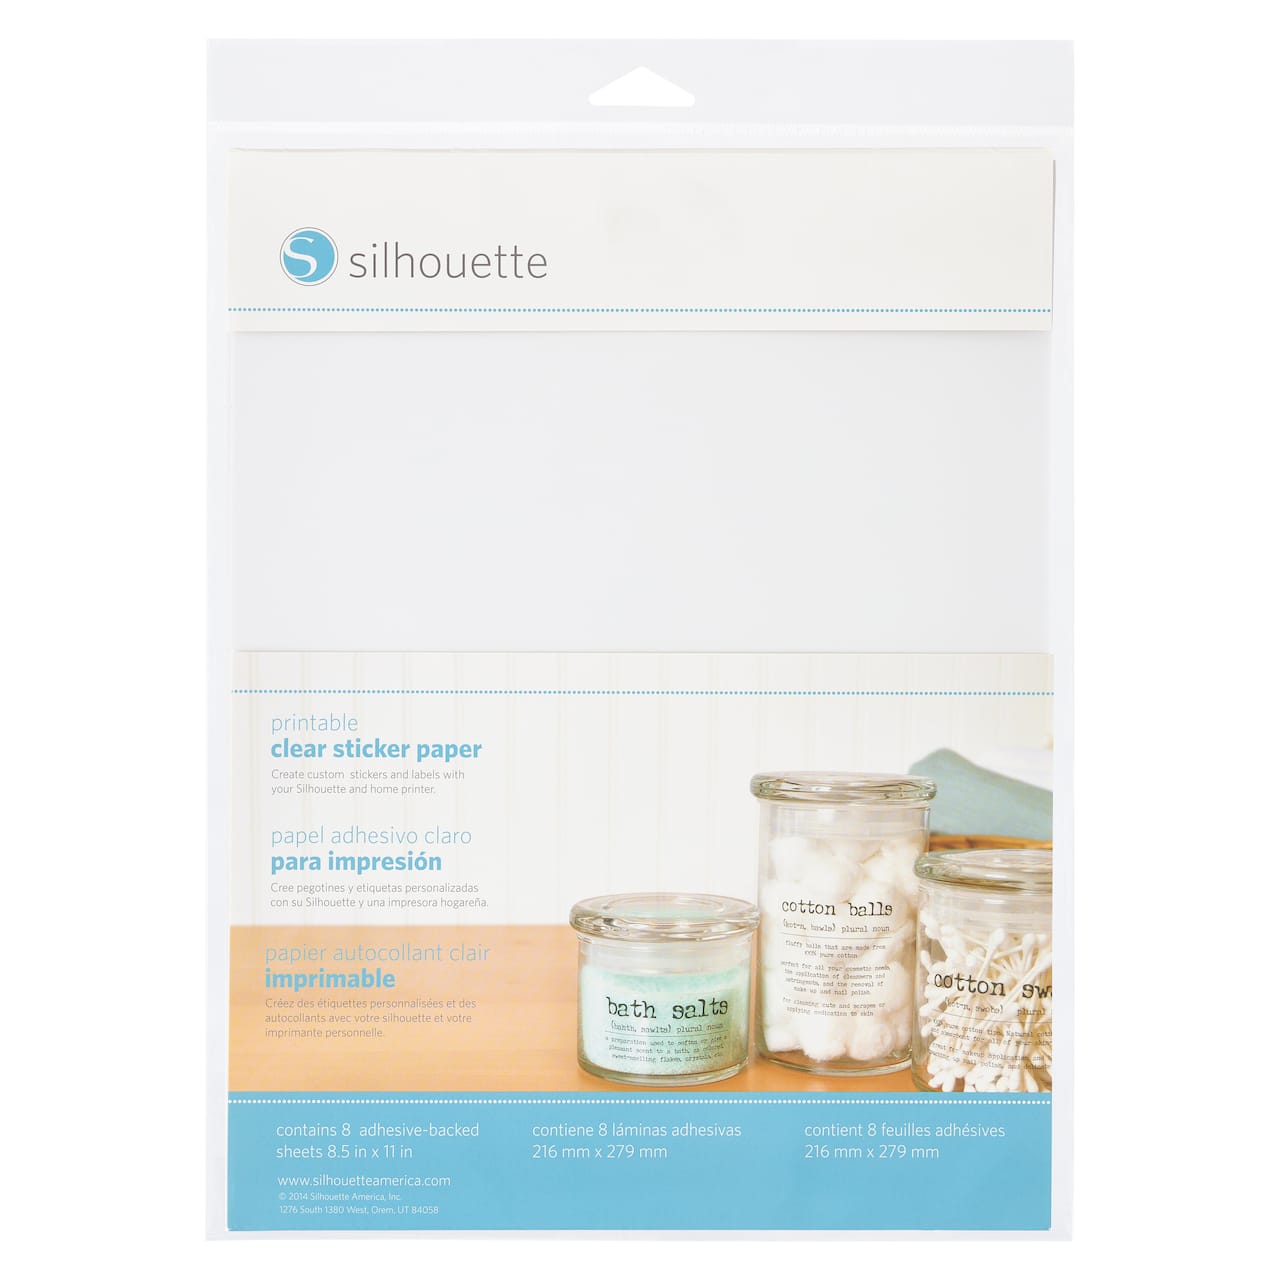 Silhouette® Printable Clear Sticker Paper